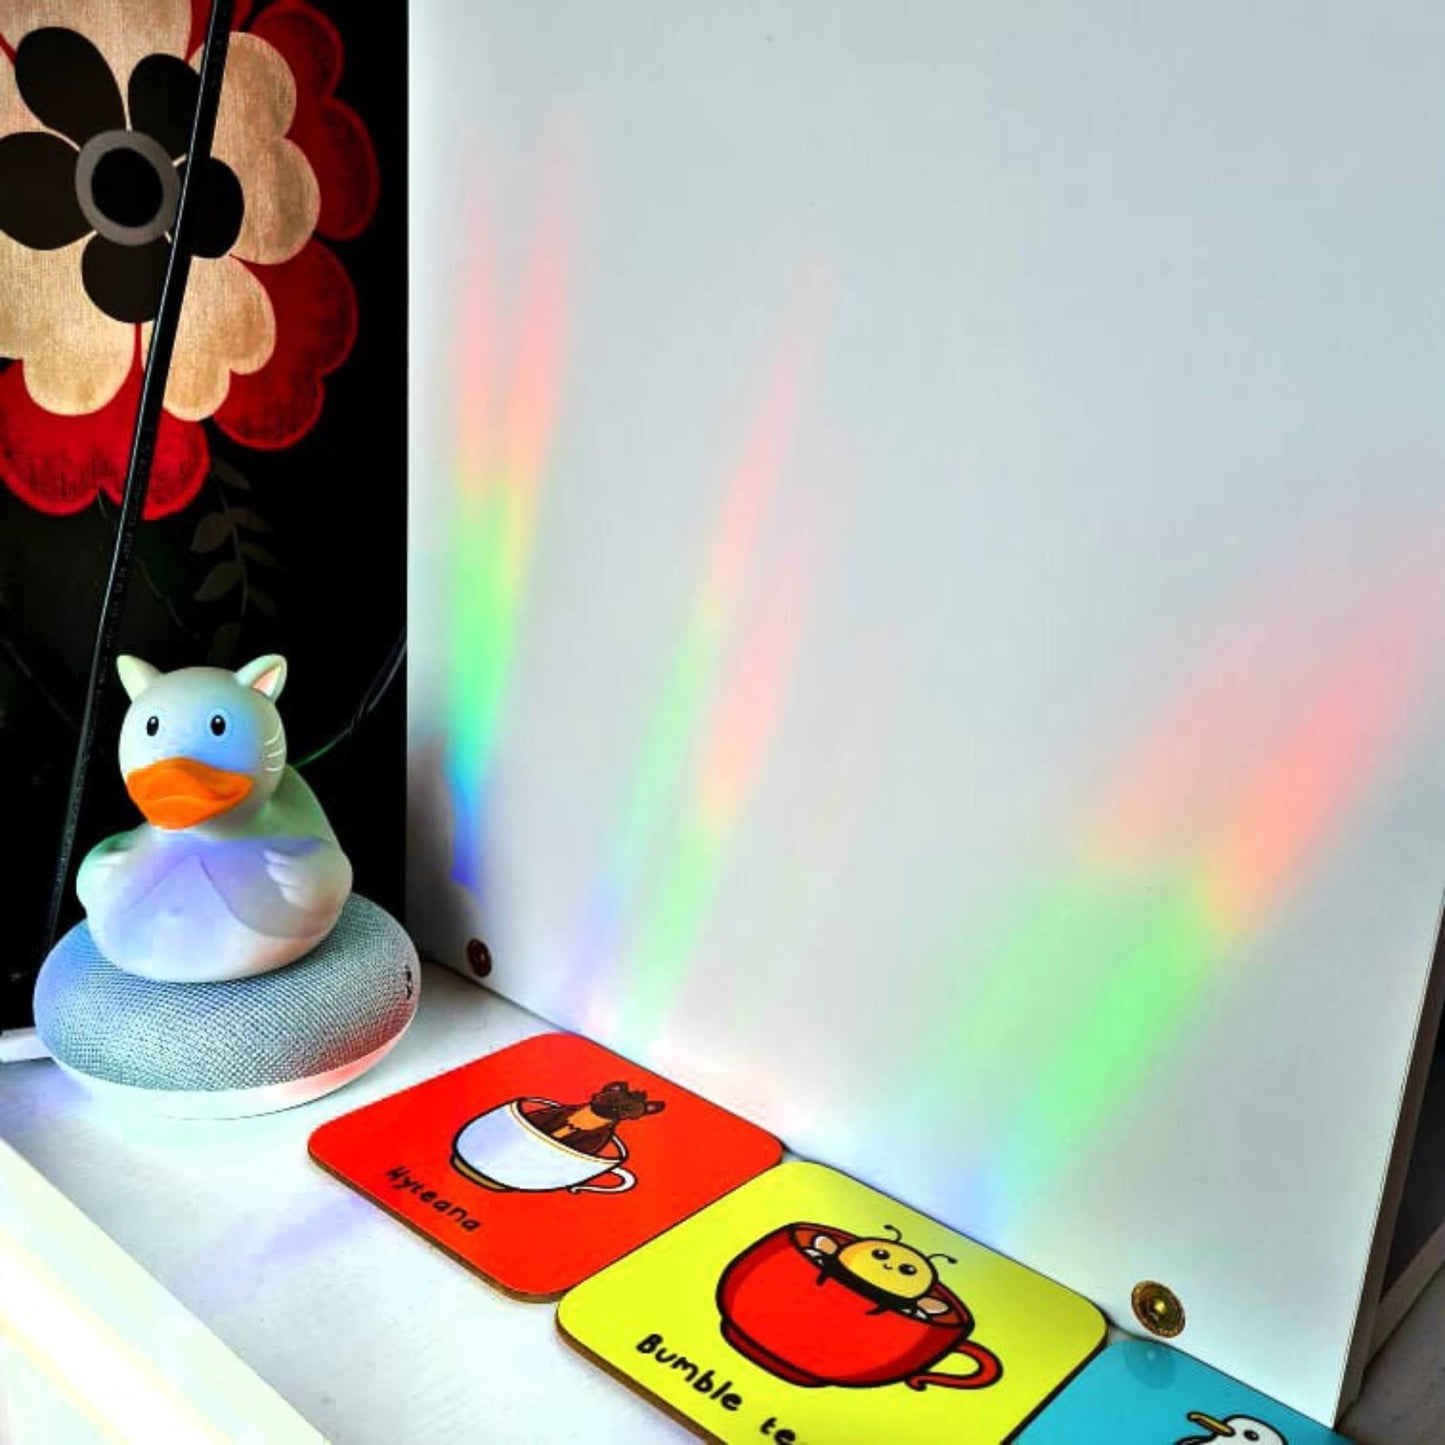 Rainbows being cast all over a white desk and storage unit of innabox coasters and a rubber cat duck from the Don't Burn Yourself Out Sun Catcher Rainbow Window Sticker. The holographic design is inspired by self care.